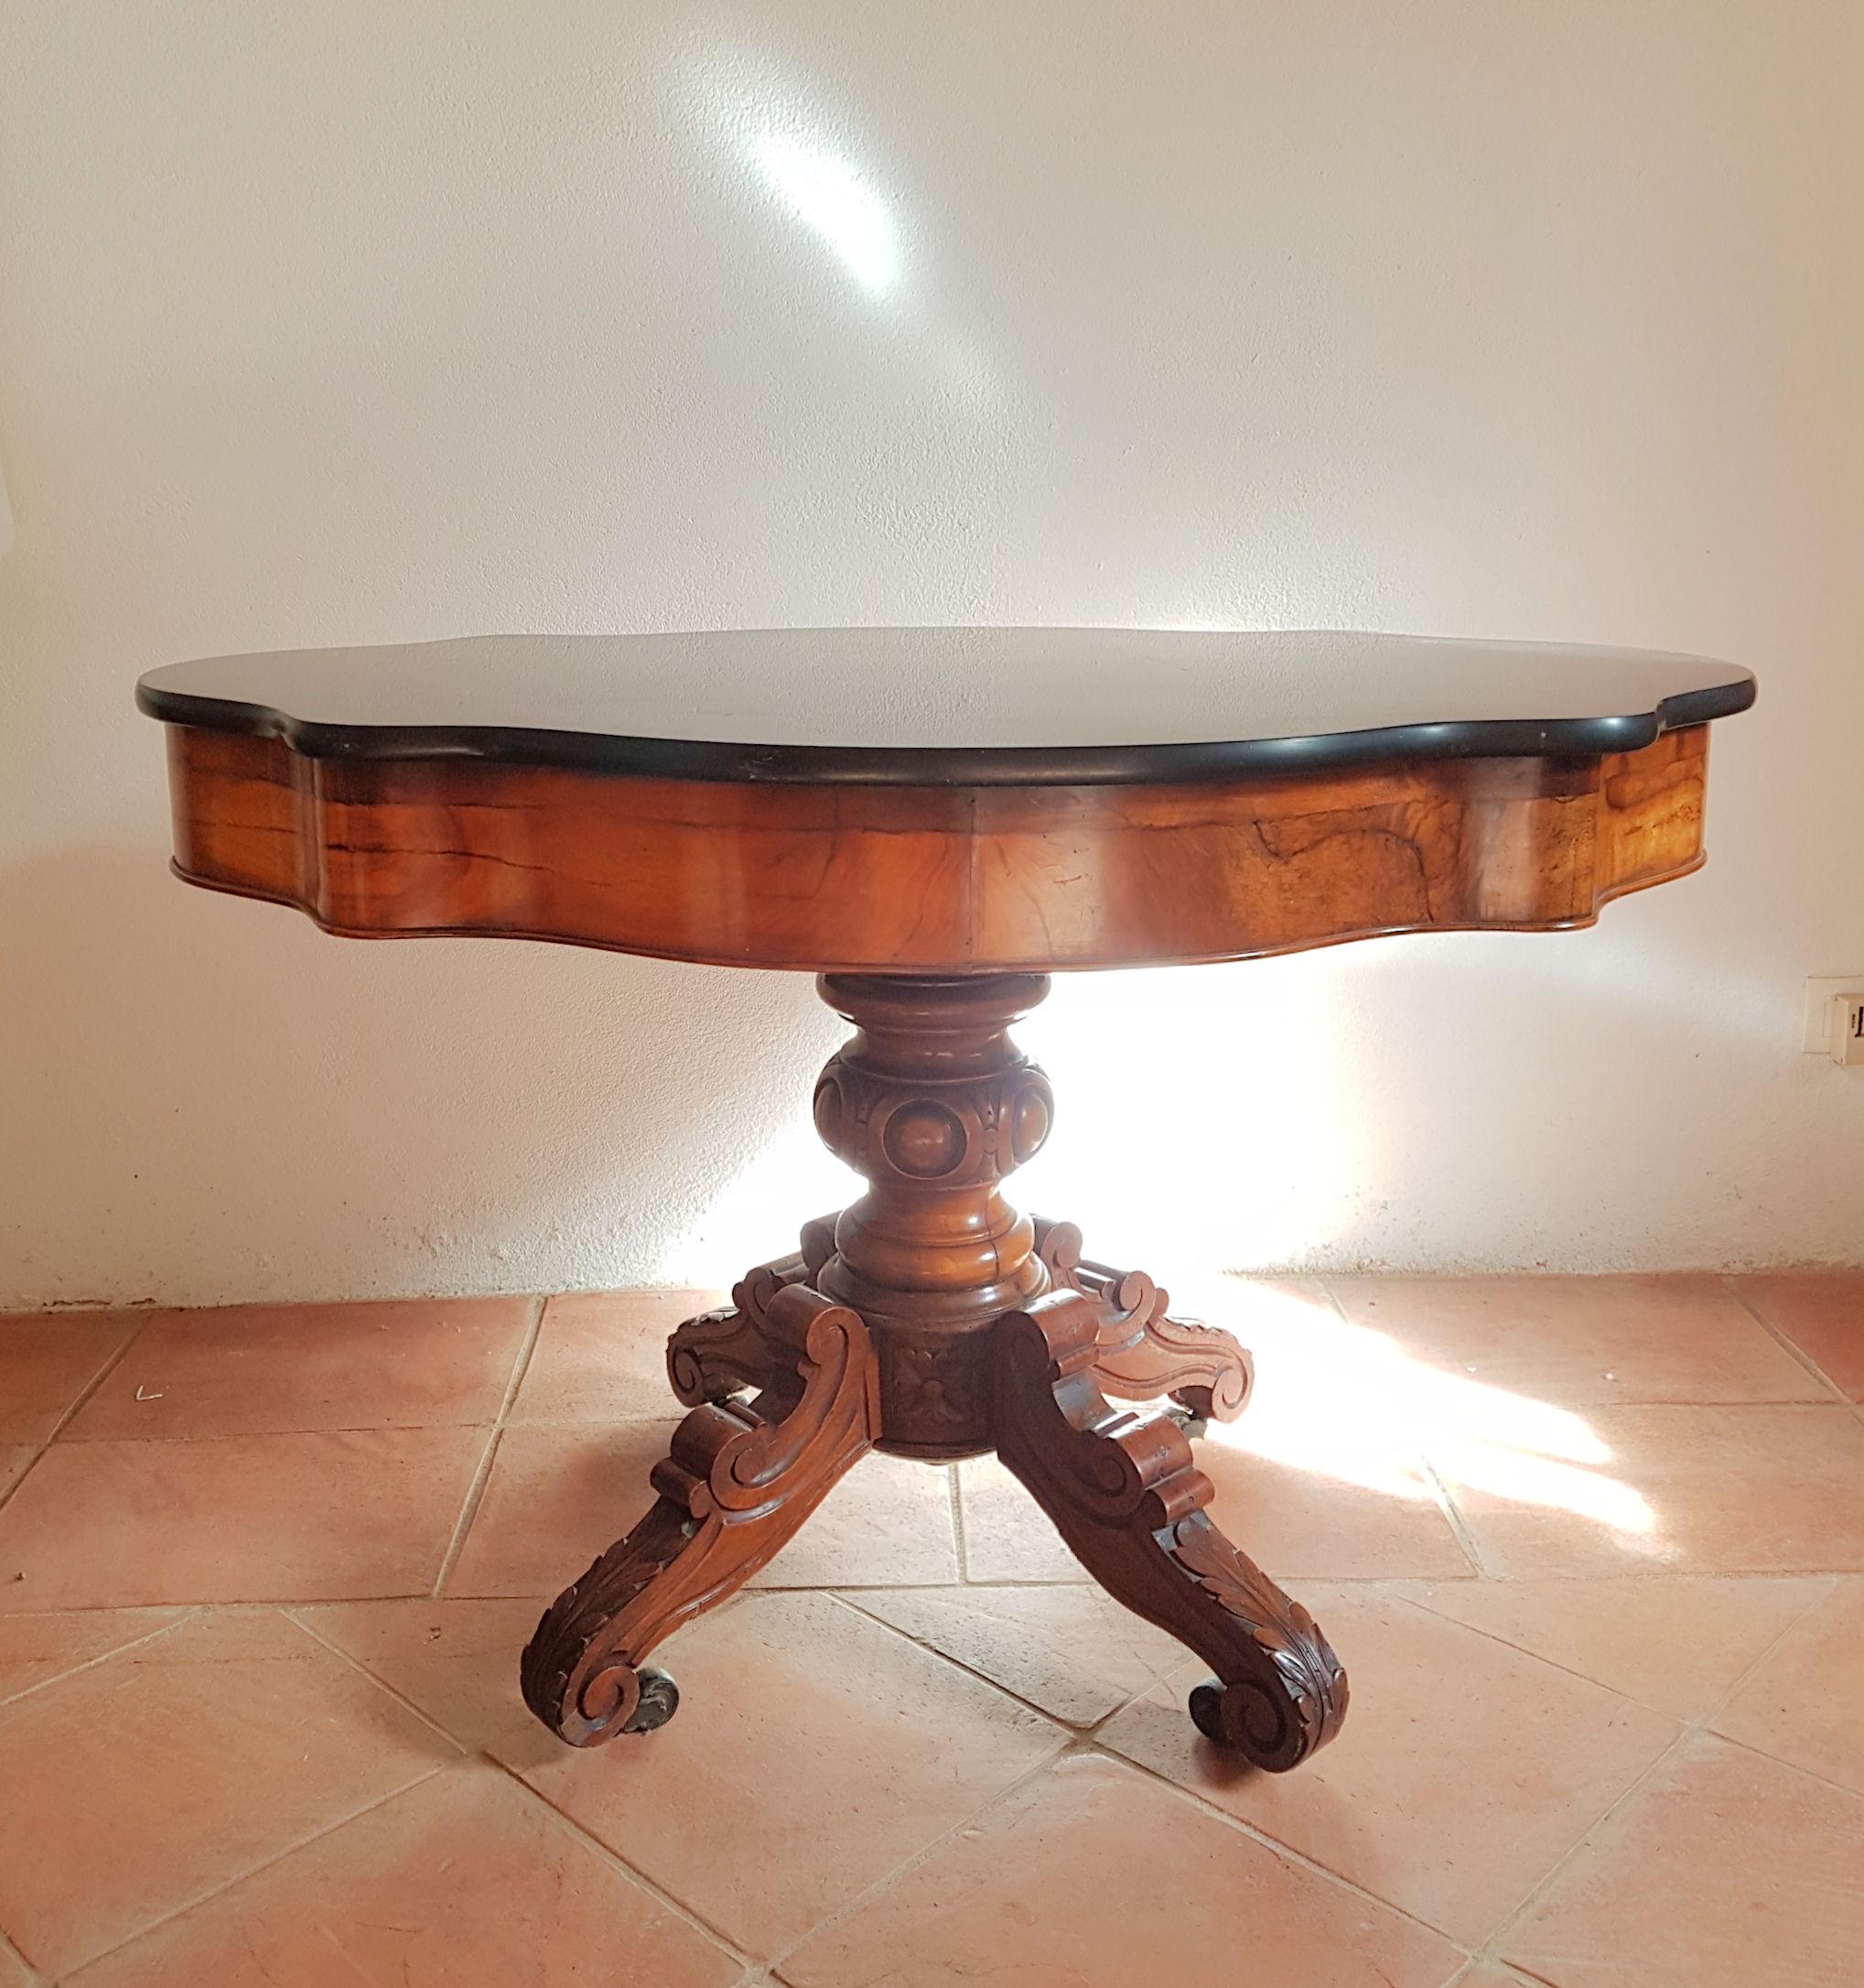 French 19th century table, in walnut wood and black marble top,
with carved baluster column and four scroll legs with castors.
In good condition.
  